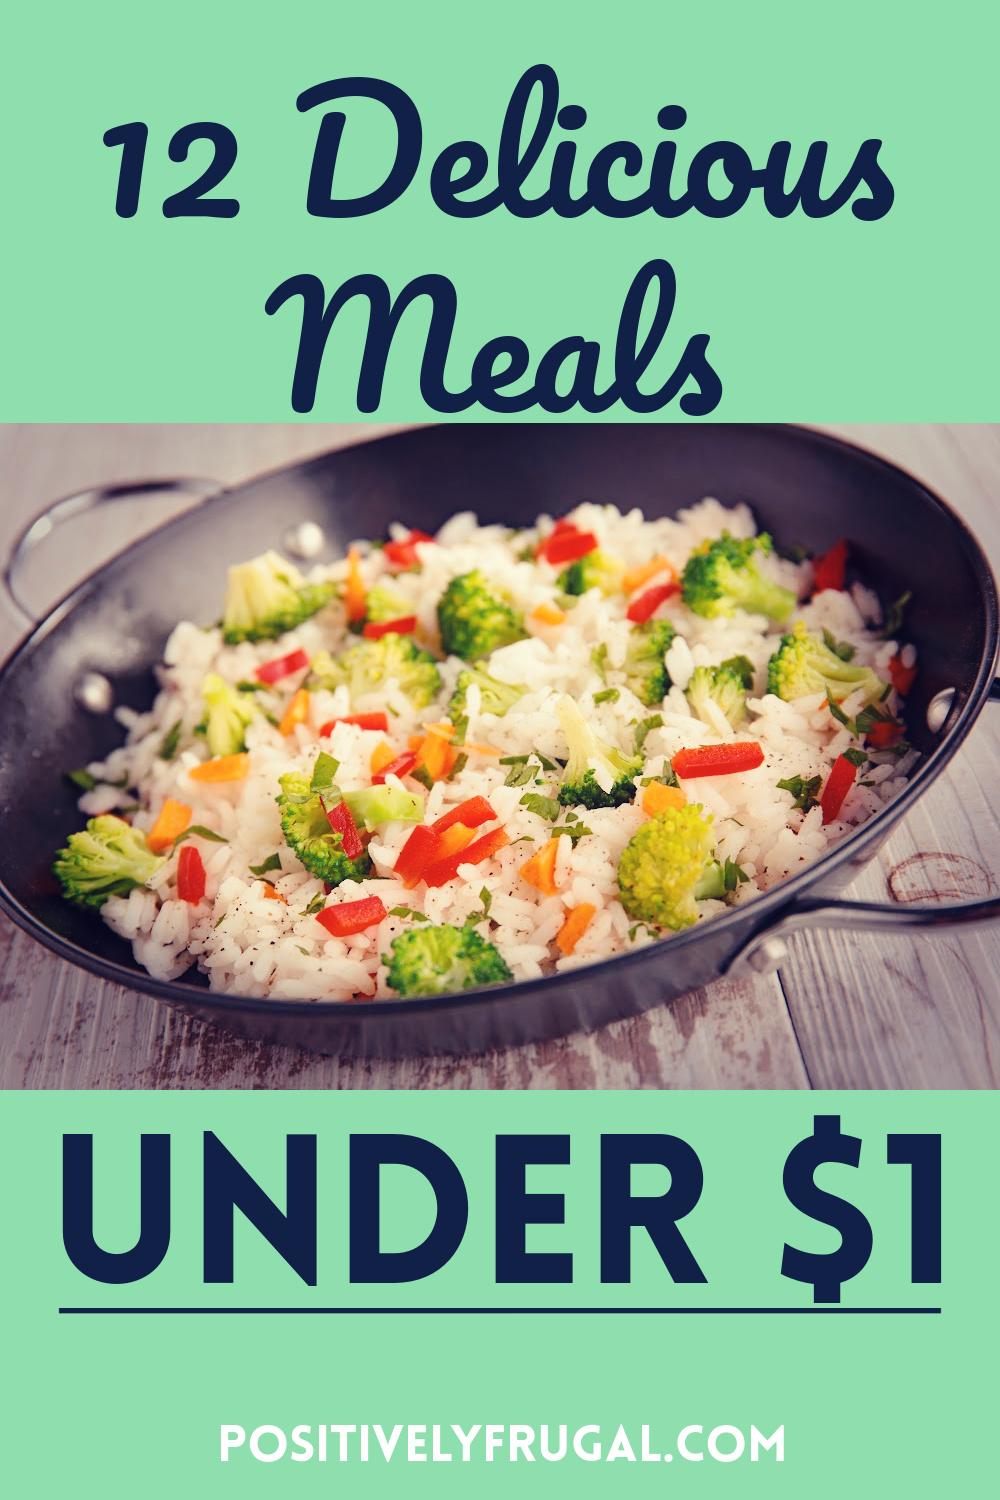 12 Delicious Meals Under One Dollar by PositivelyFrugal.com